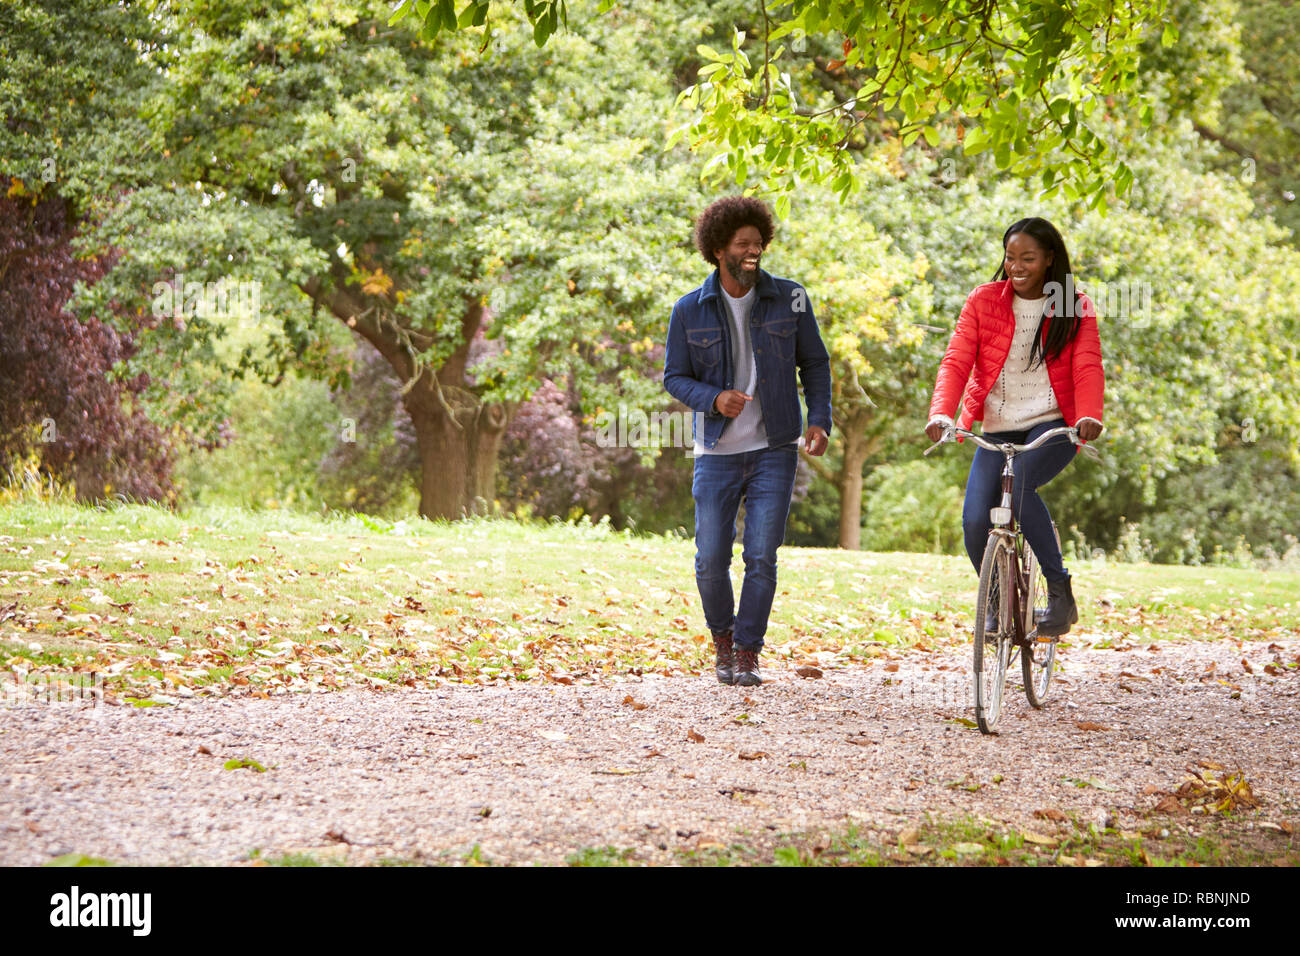 Black couple having fun in a park, the woman riding a bike, front view Stock Photo